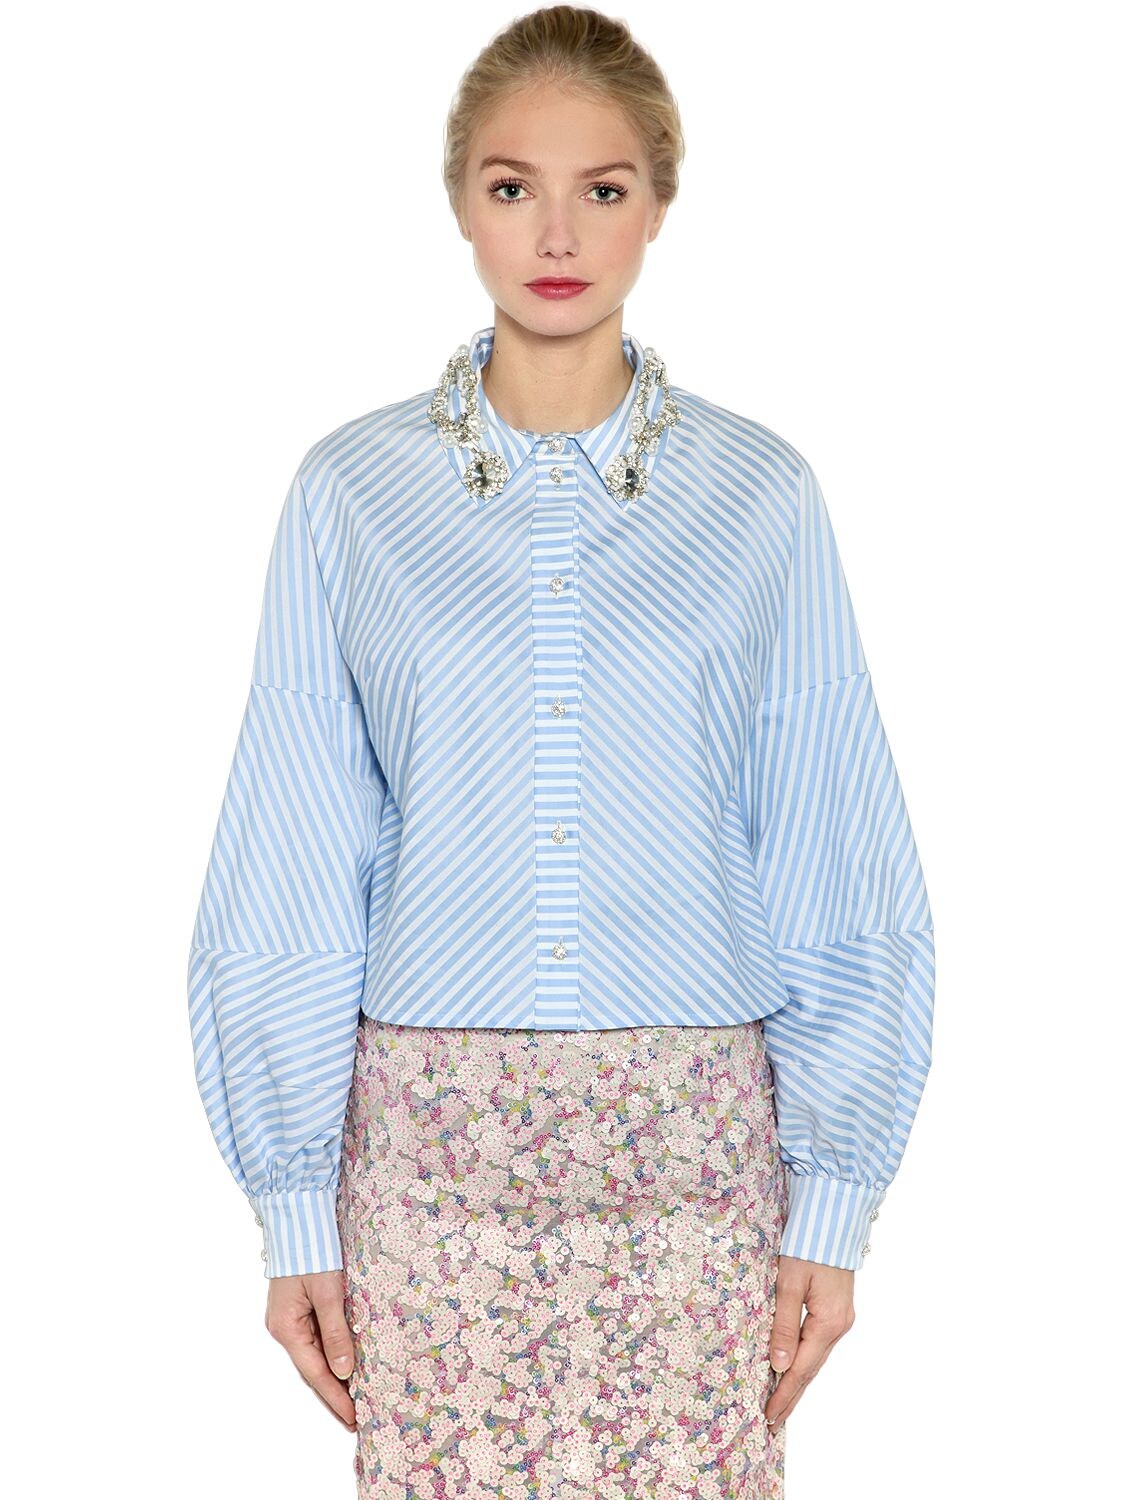 Antonio Marras Embellished Striped Cropped Cotton Shirt In White/blue